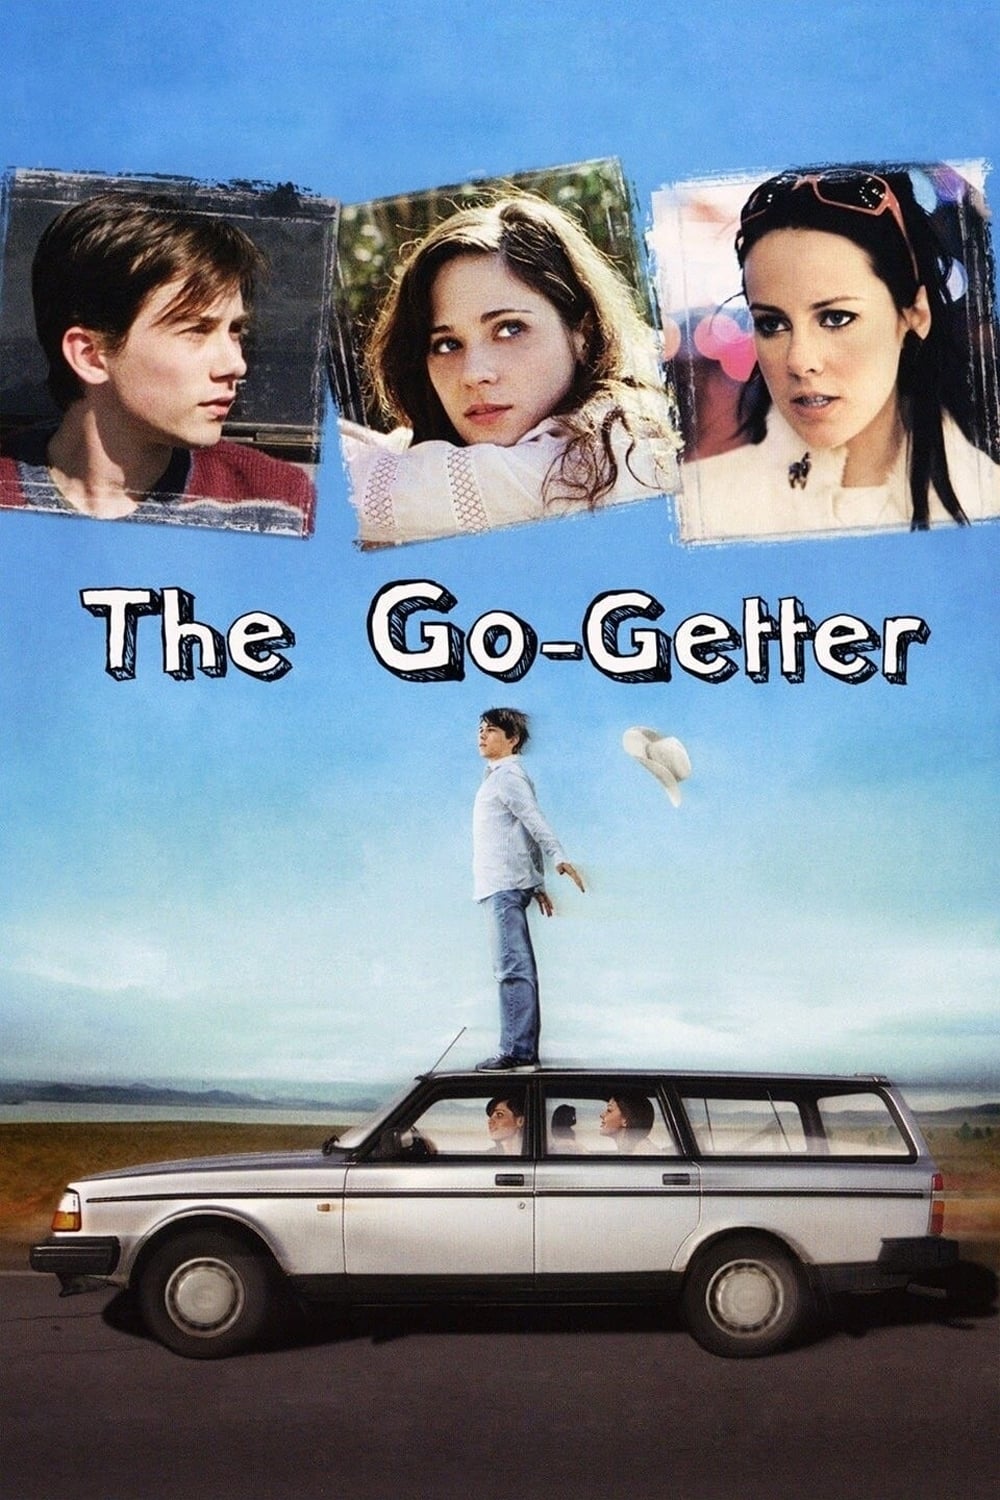 Download The Go-Getter 2007 Subtitles English, Eng SUB